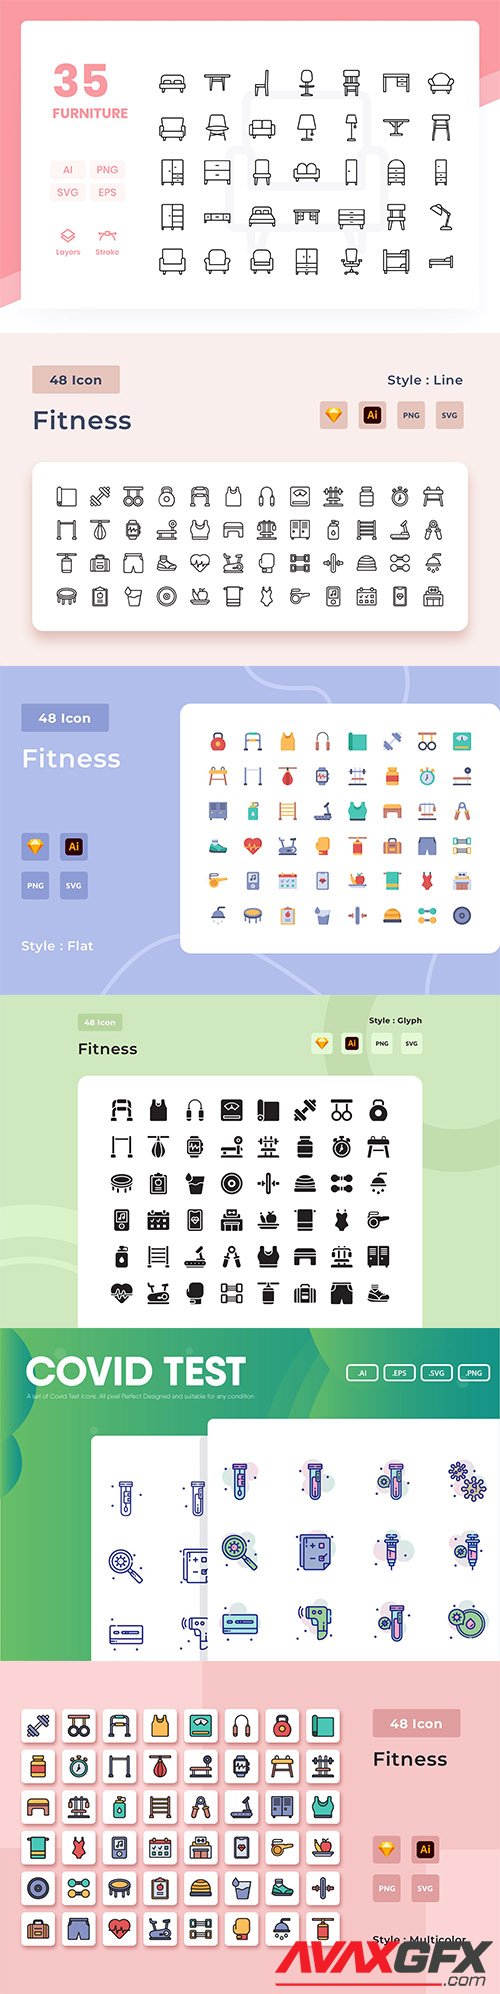 Mix collection of vector icons vol3